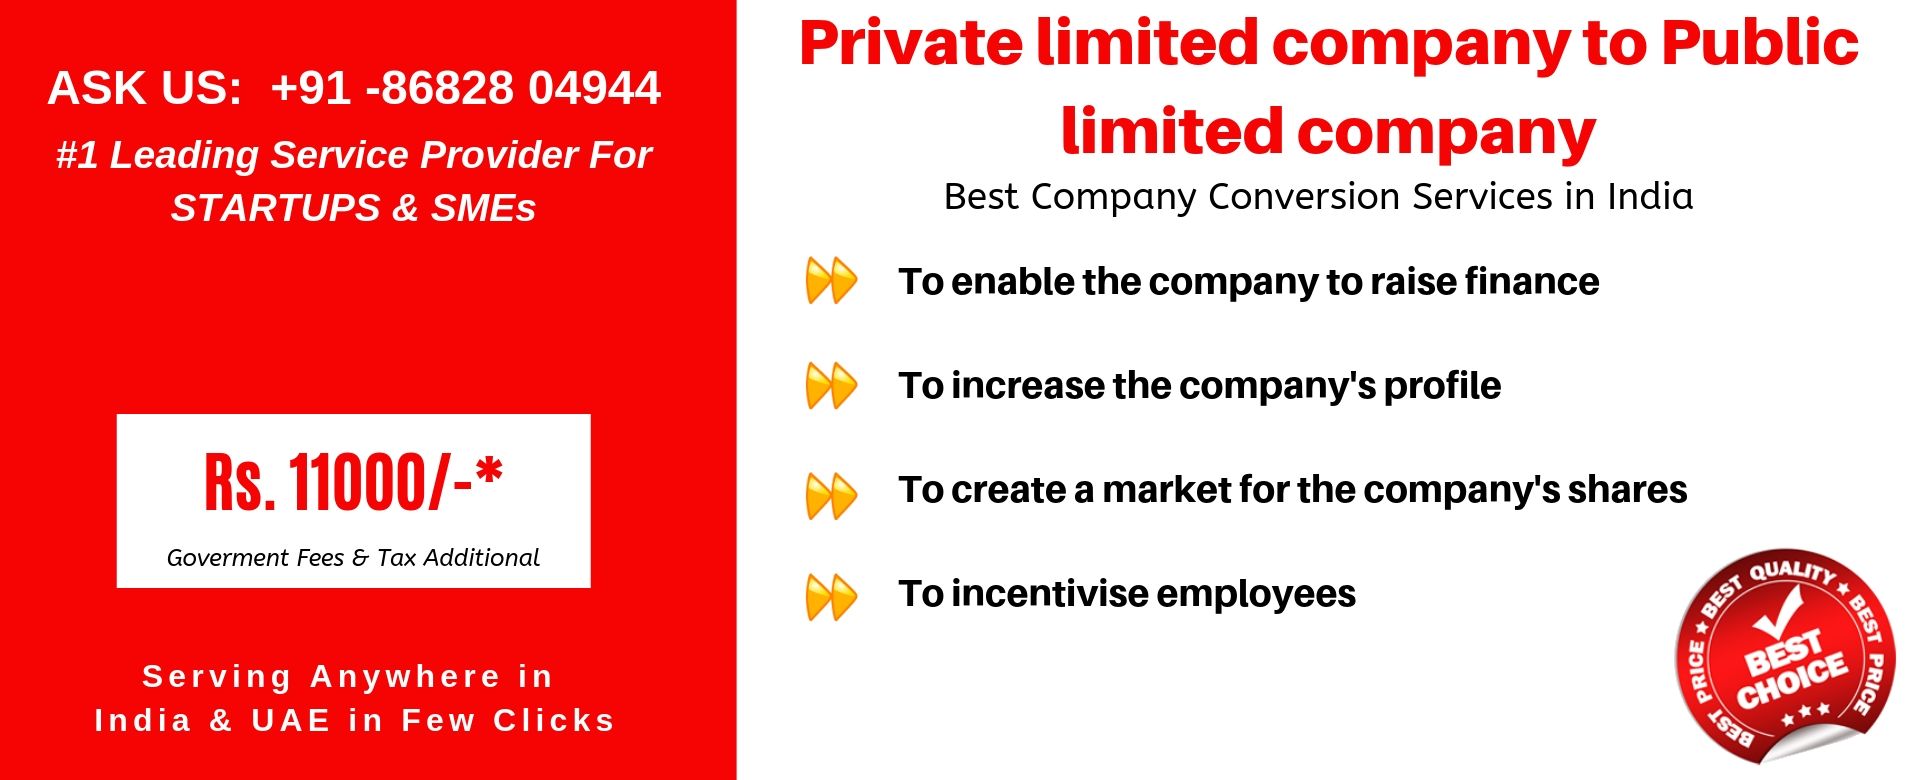 private limited company to public limited company in india